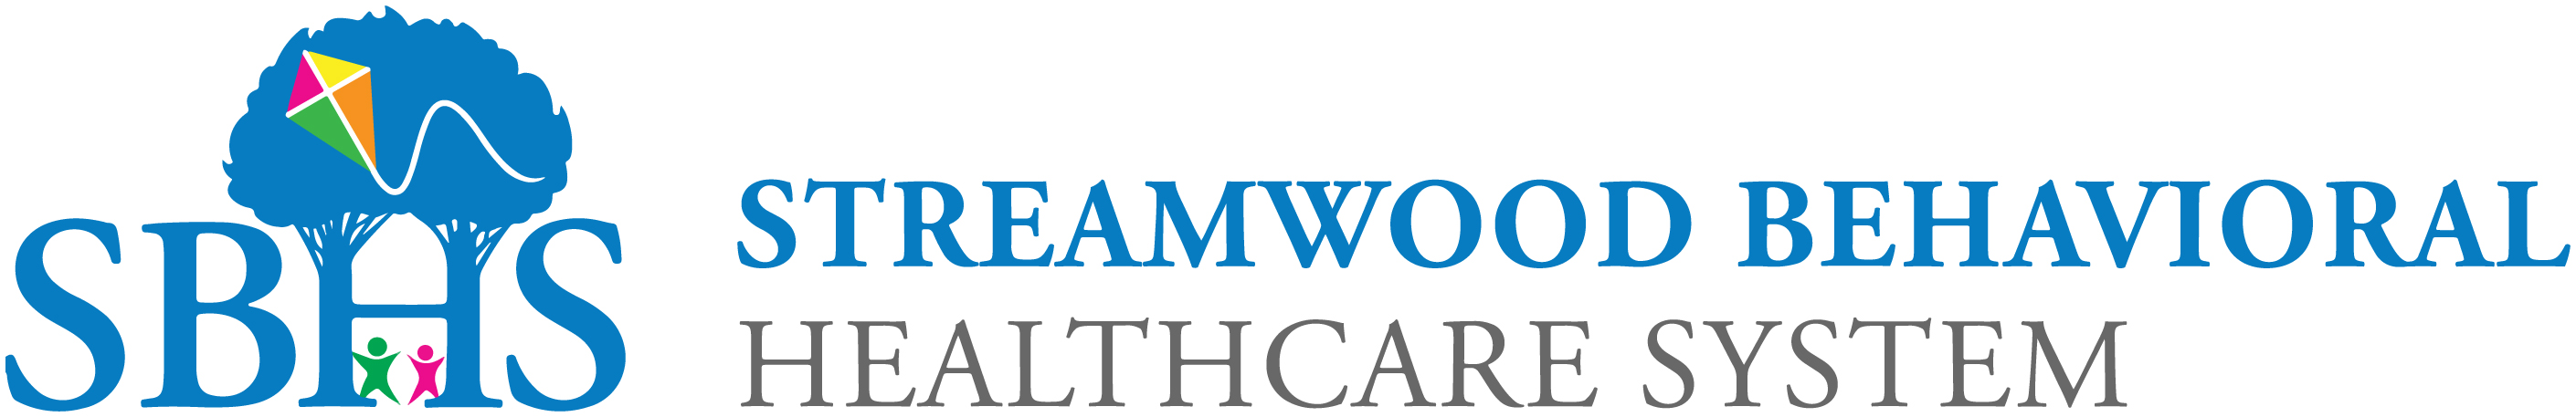  Streamwood Behavioral Healthcare Systems